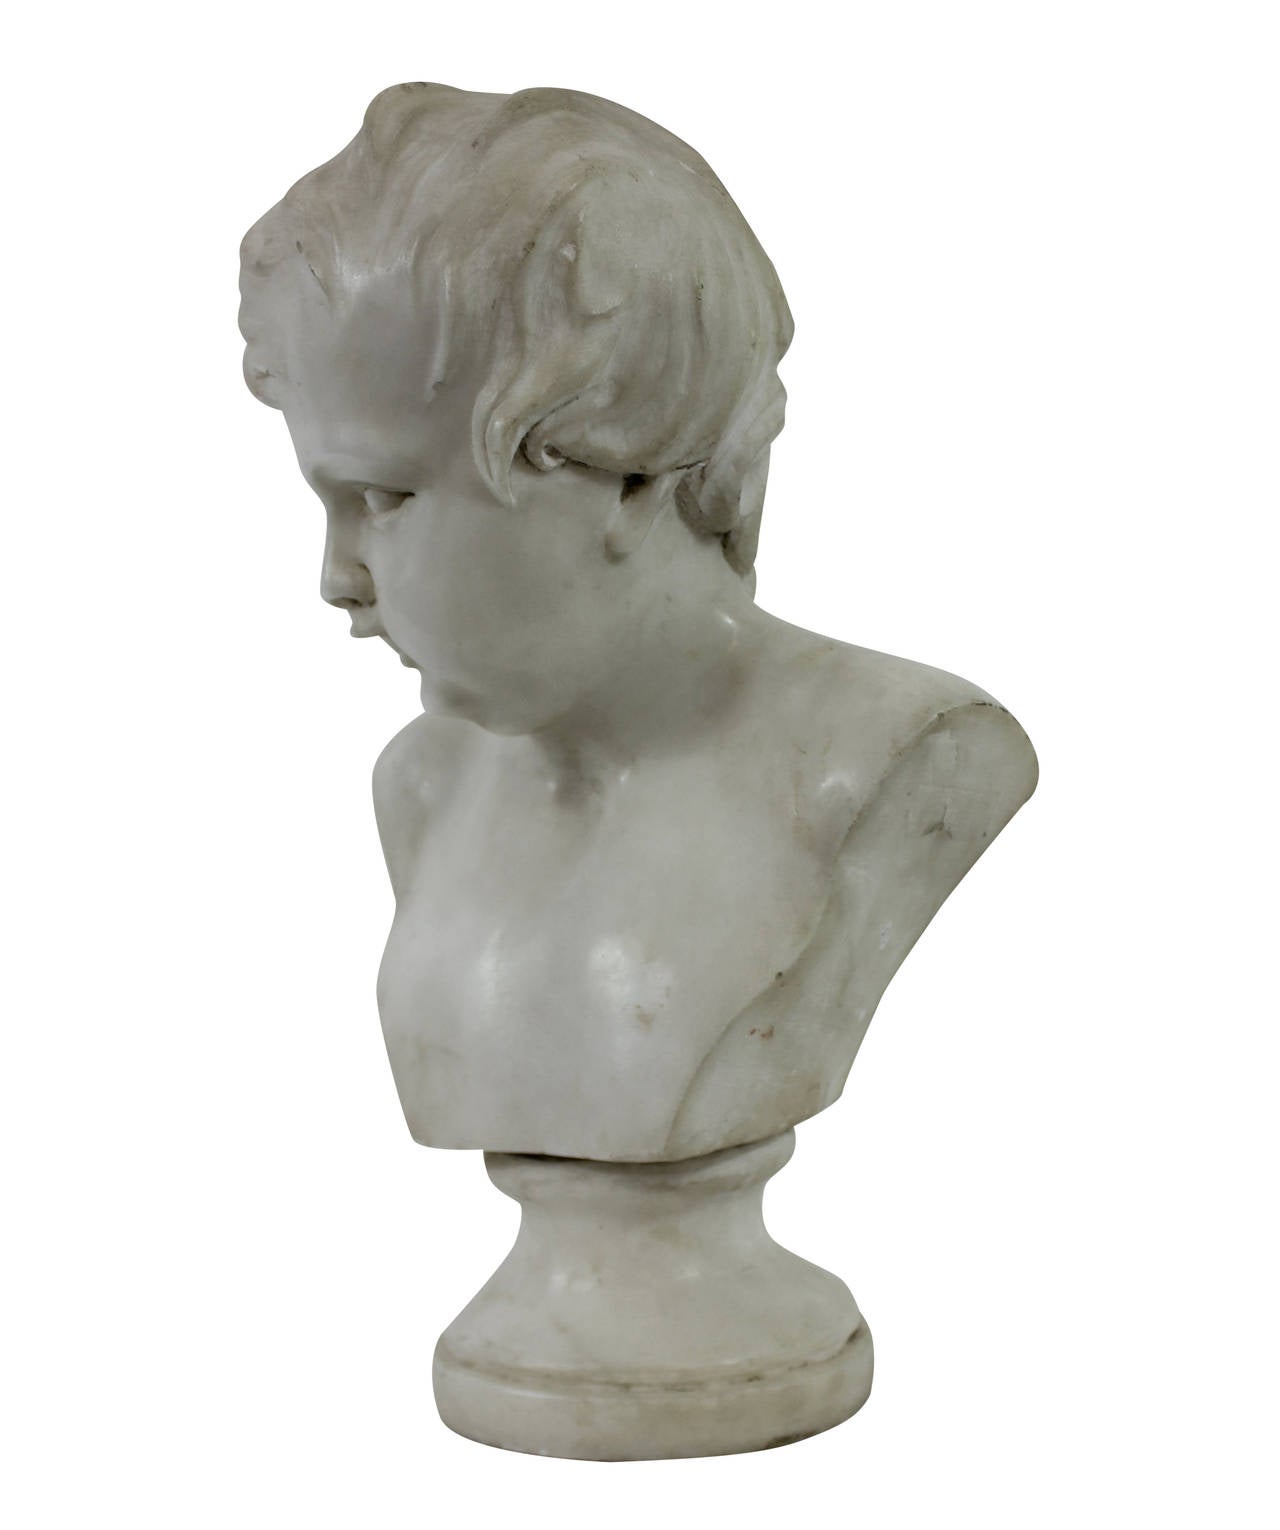 A fine English Regency marble bust of a boy. Sculptor unknown but finely executed.